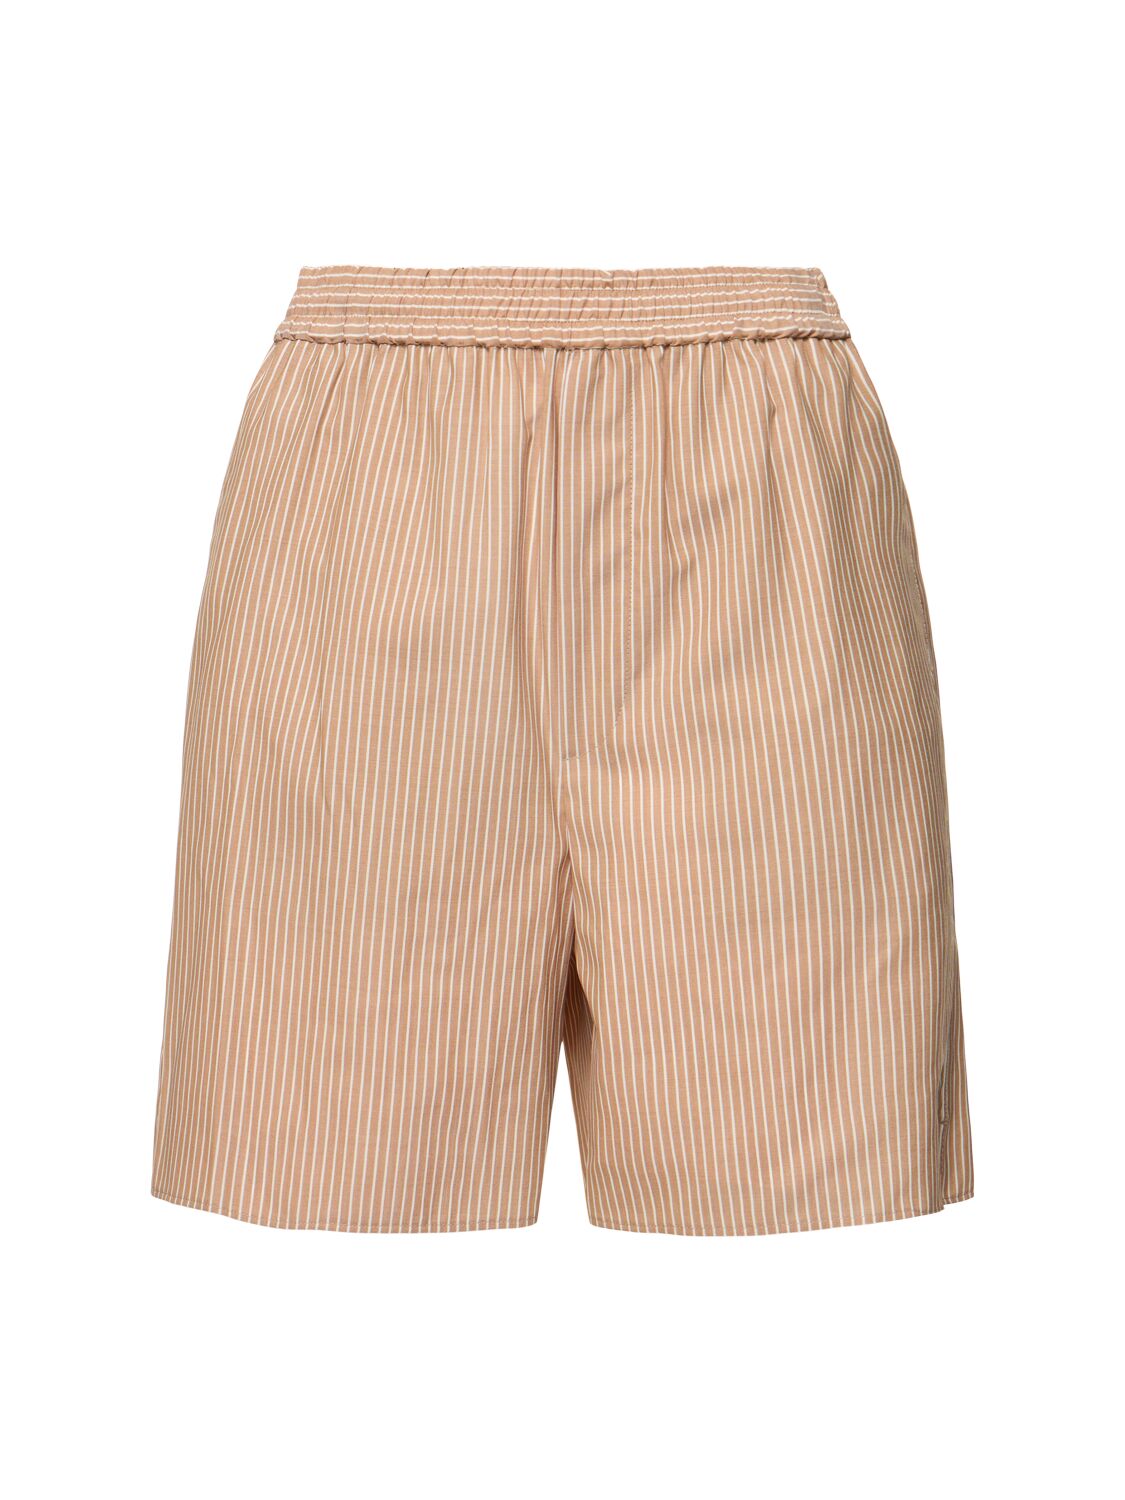 Image of Super Fine Wool Striped Shorts